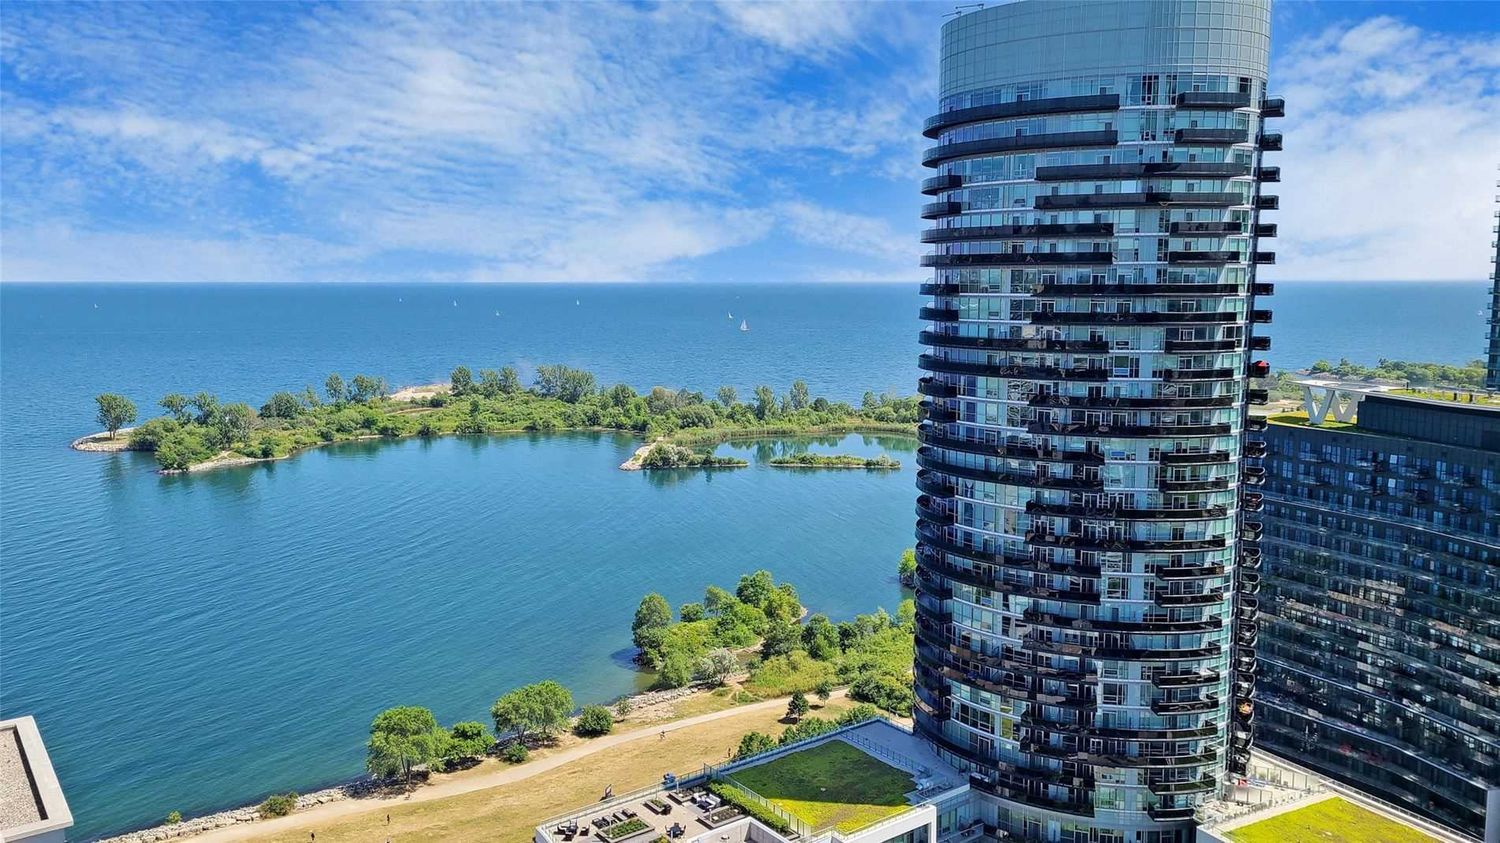 2121 Lake Shore Boulevard W. Voyager I at Waterview Condos is located in  Etobicoke, Toronto - image #3 of 13